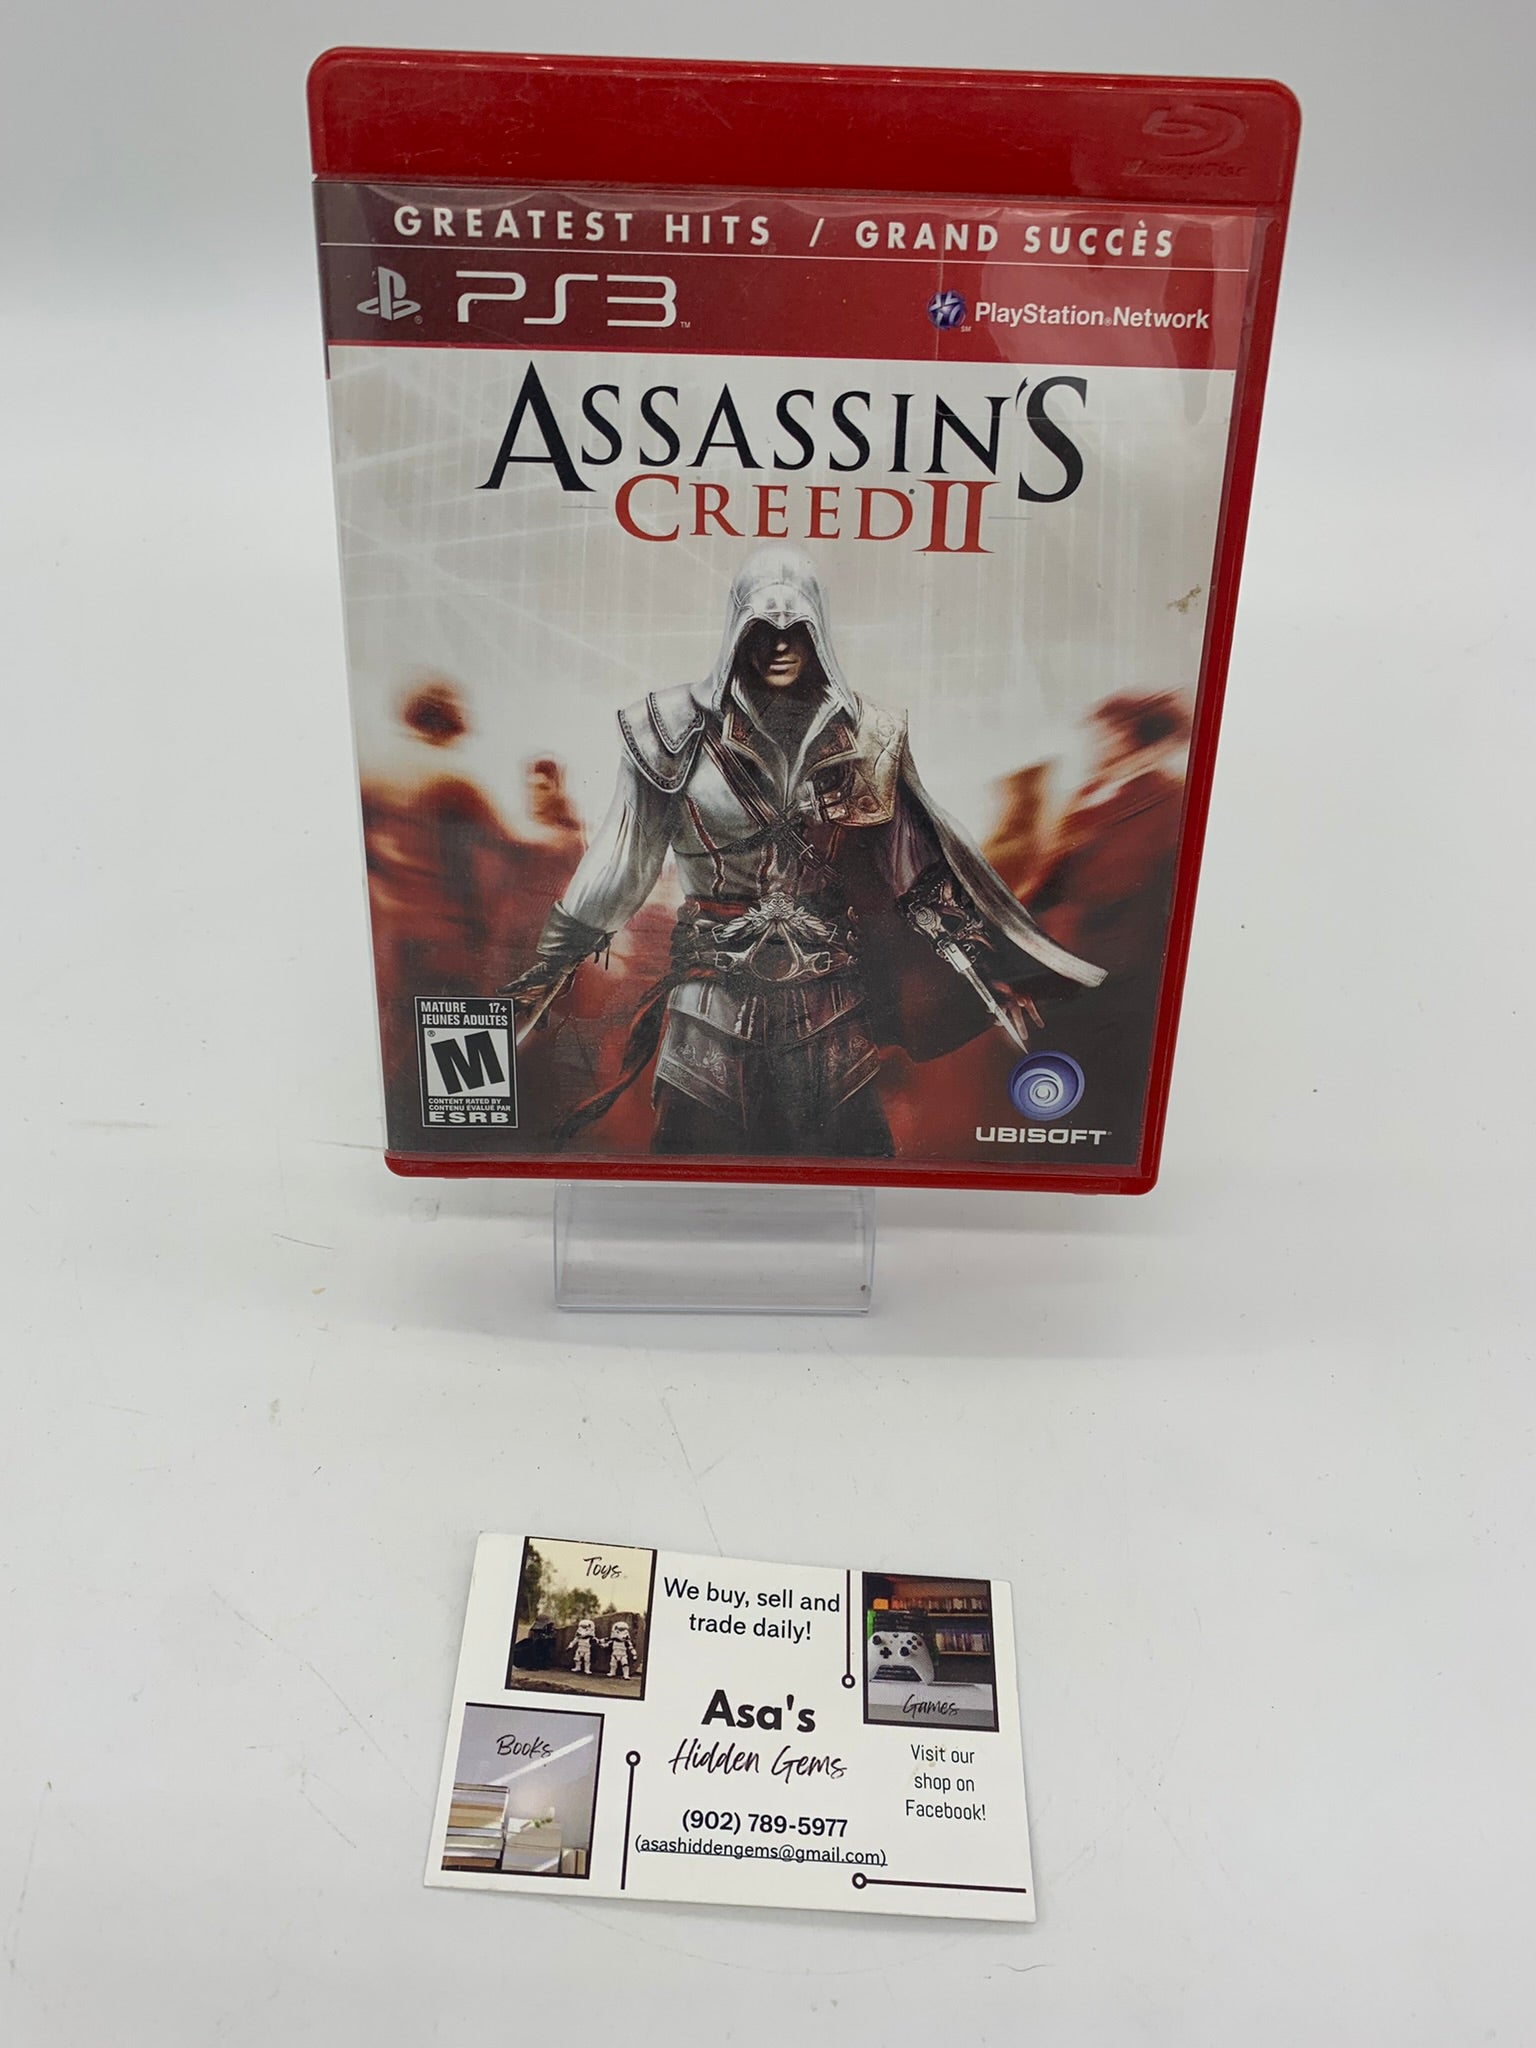 Assassin's Creed + Assassin's Creed II (video game, PS3, 2012) reviews &  ratings - Glitchwave